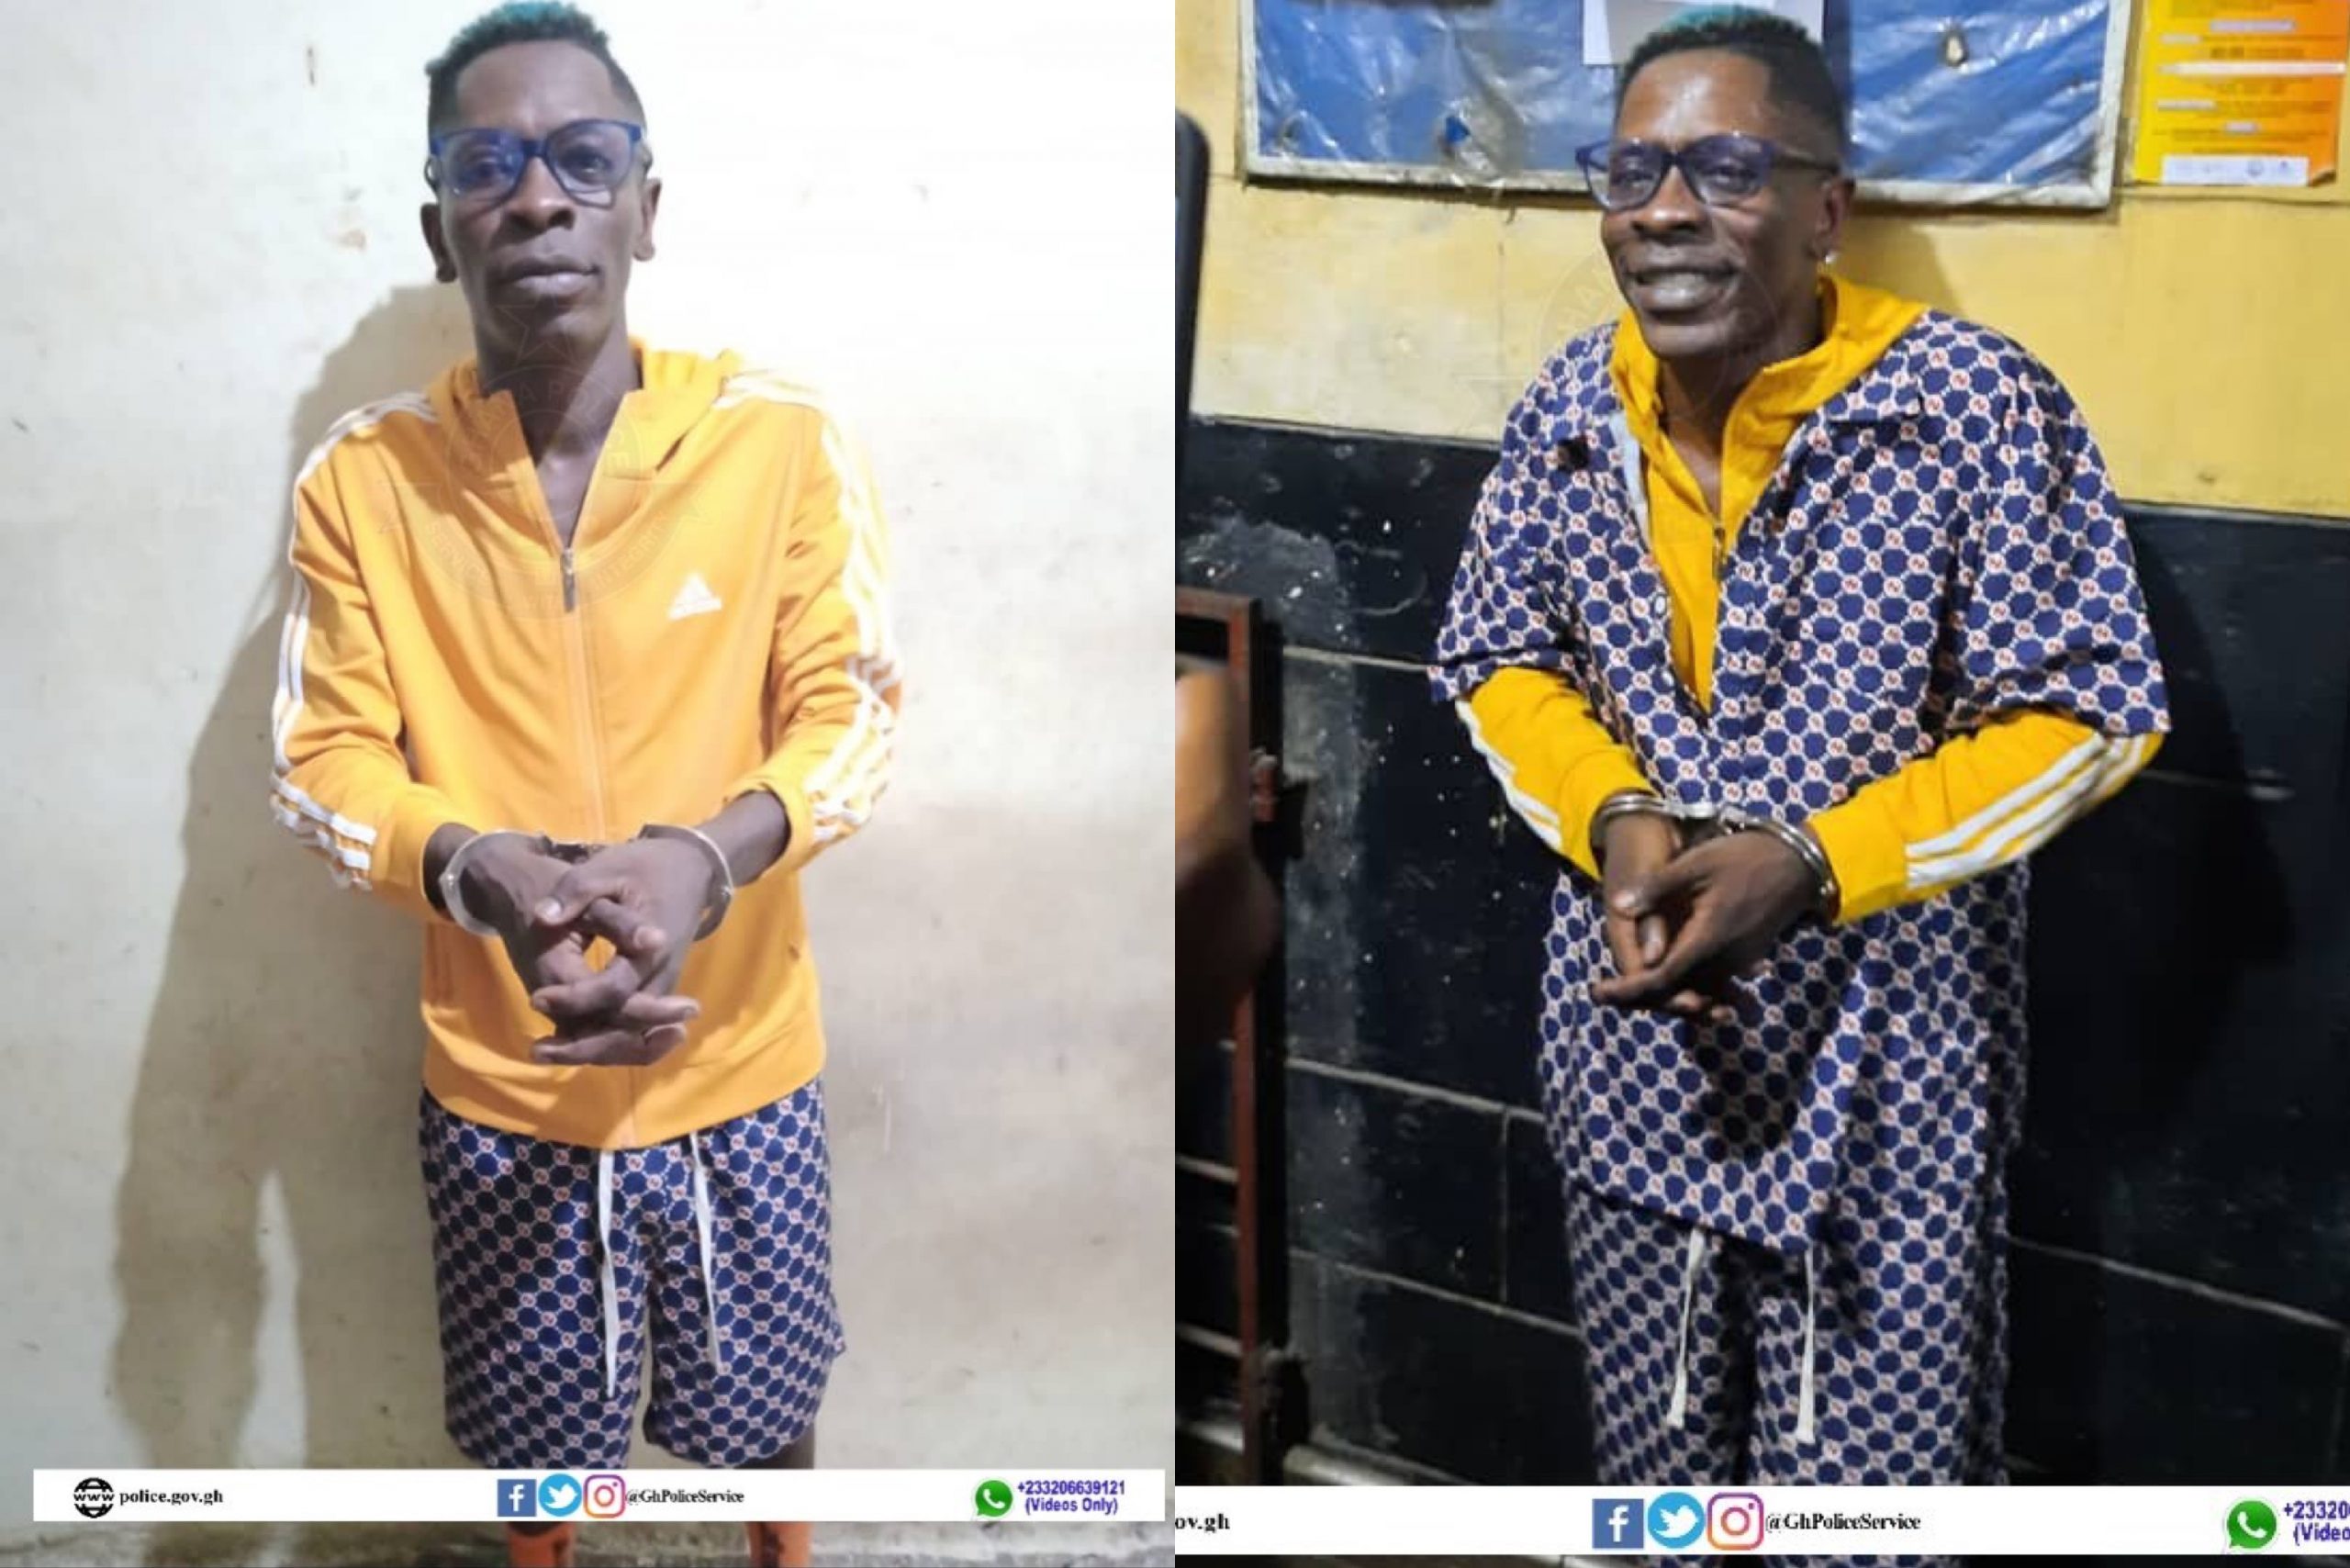 Shatta Wale in handcuffs as police confirm his arrest